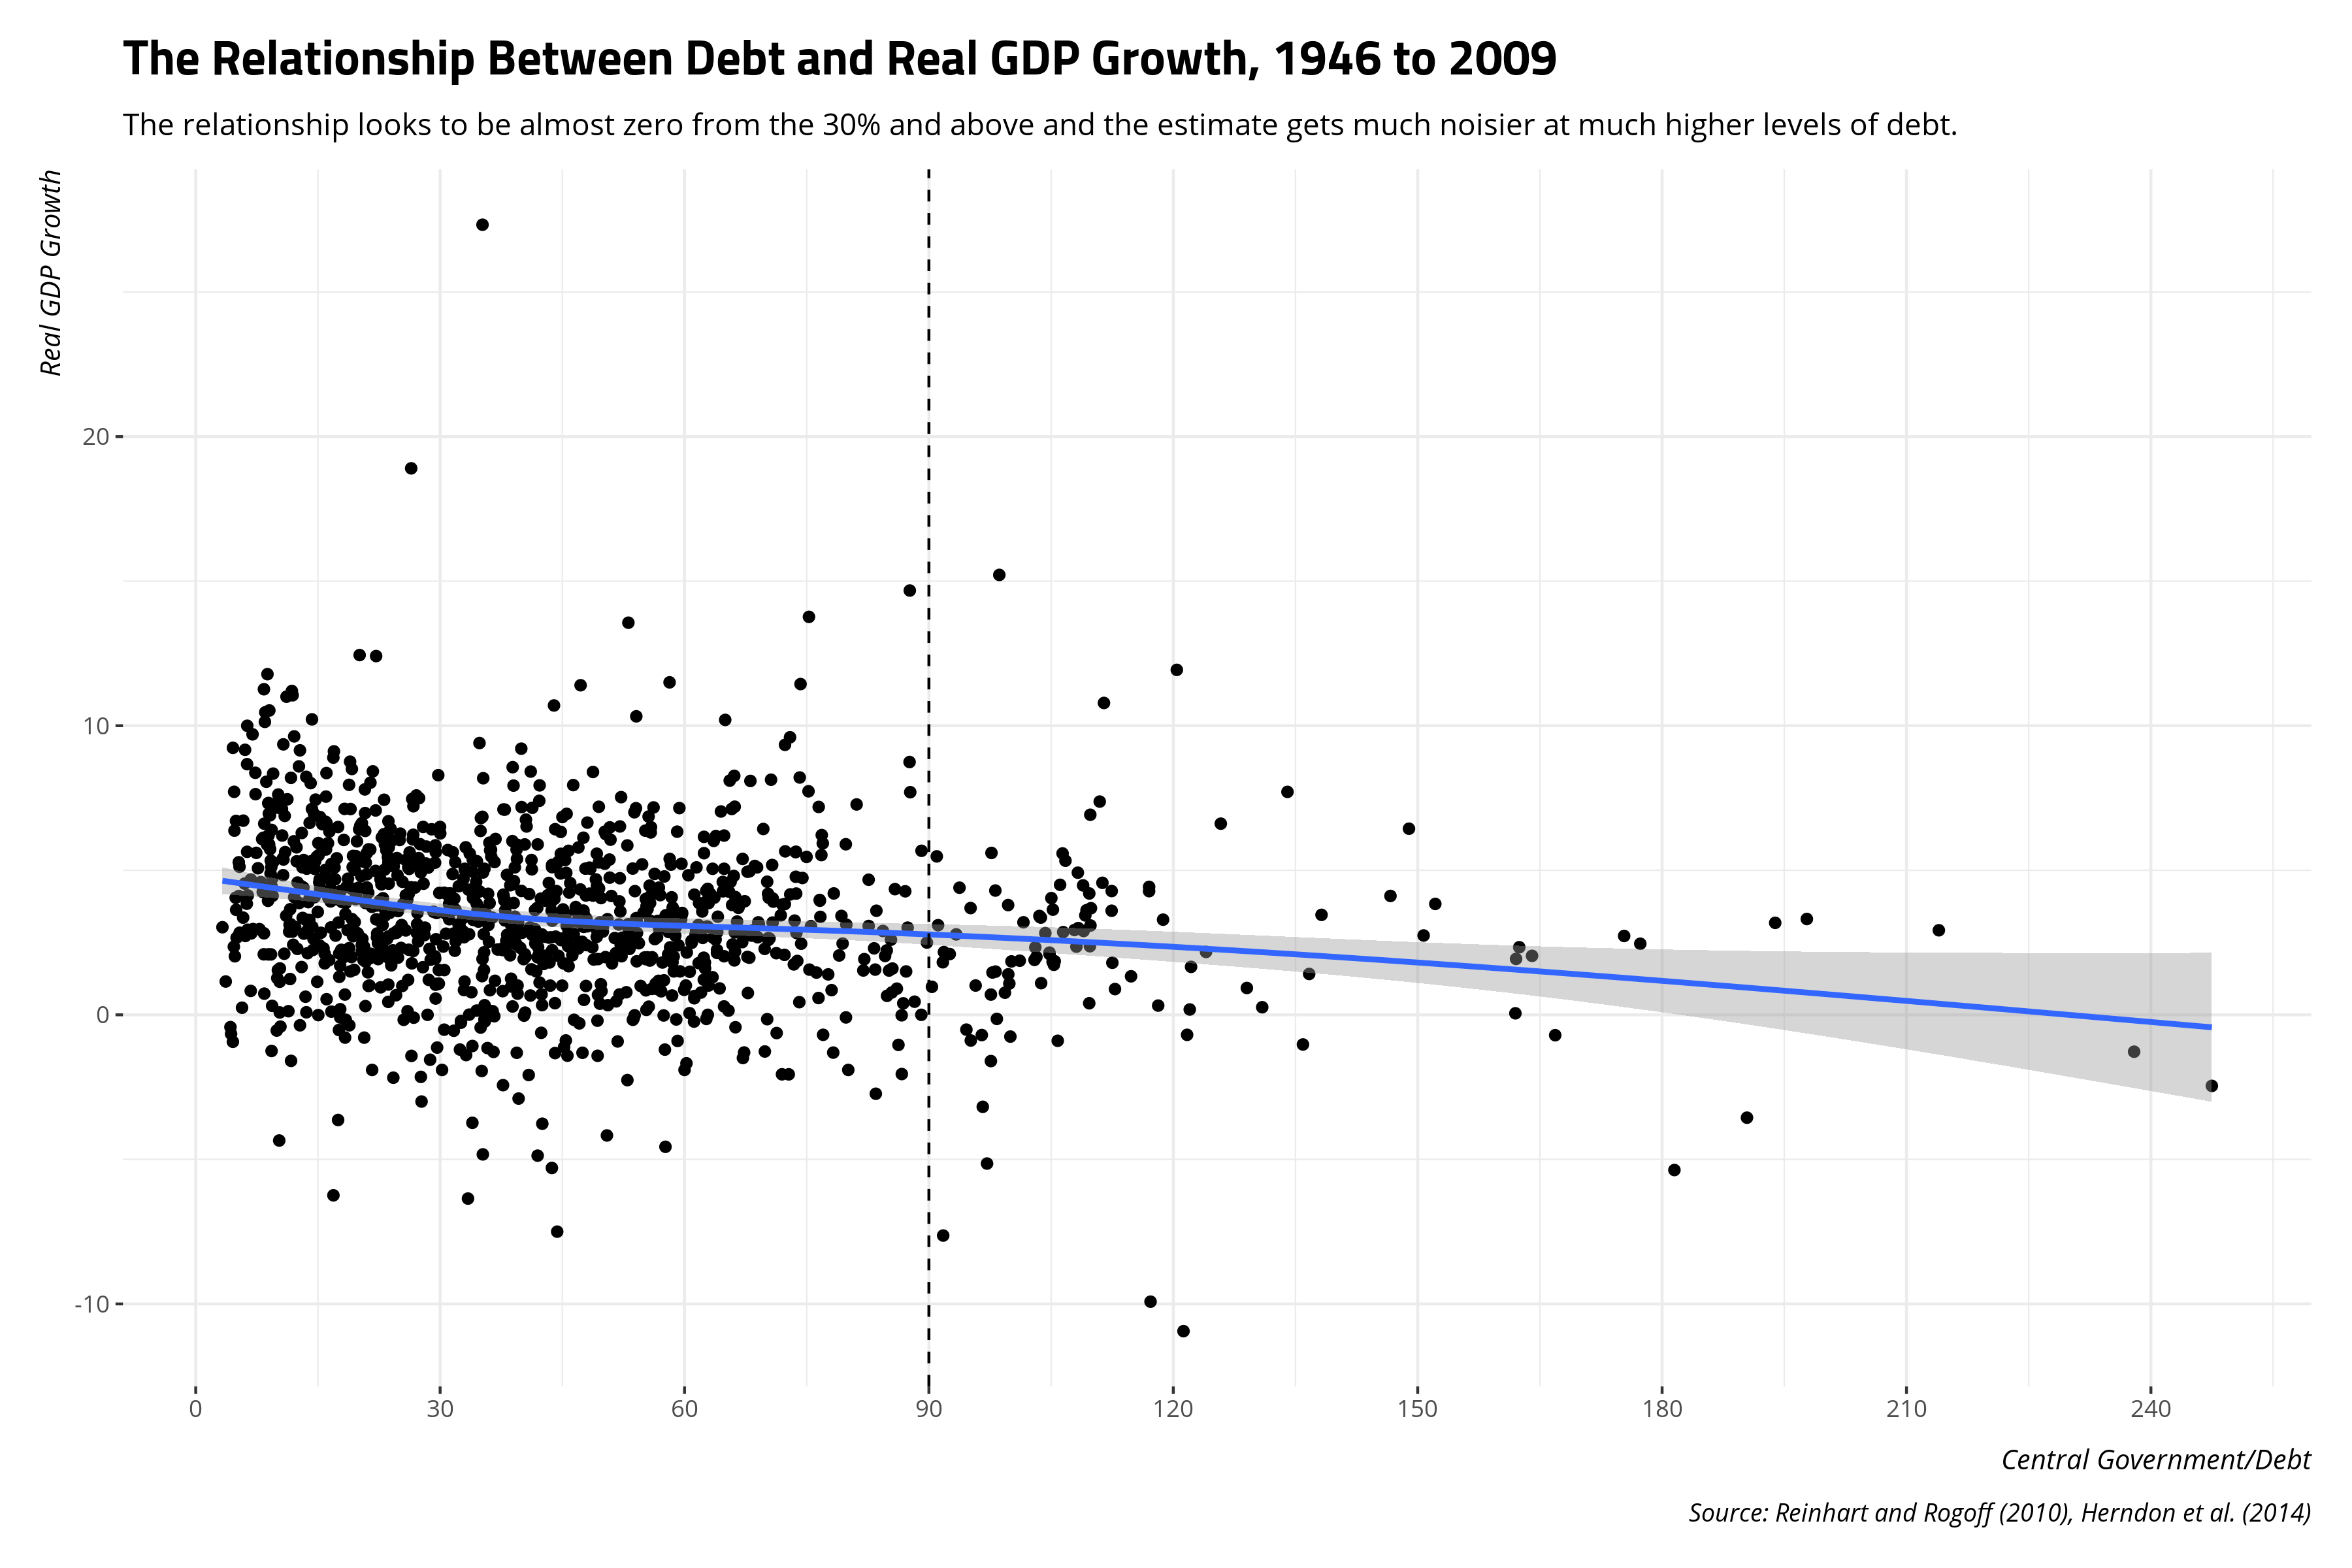 plot of chunk relationship-between-debt-real-gdp-growth-1946-2009